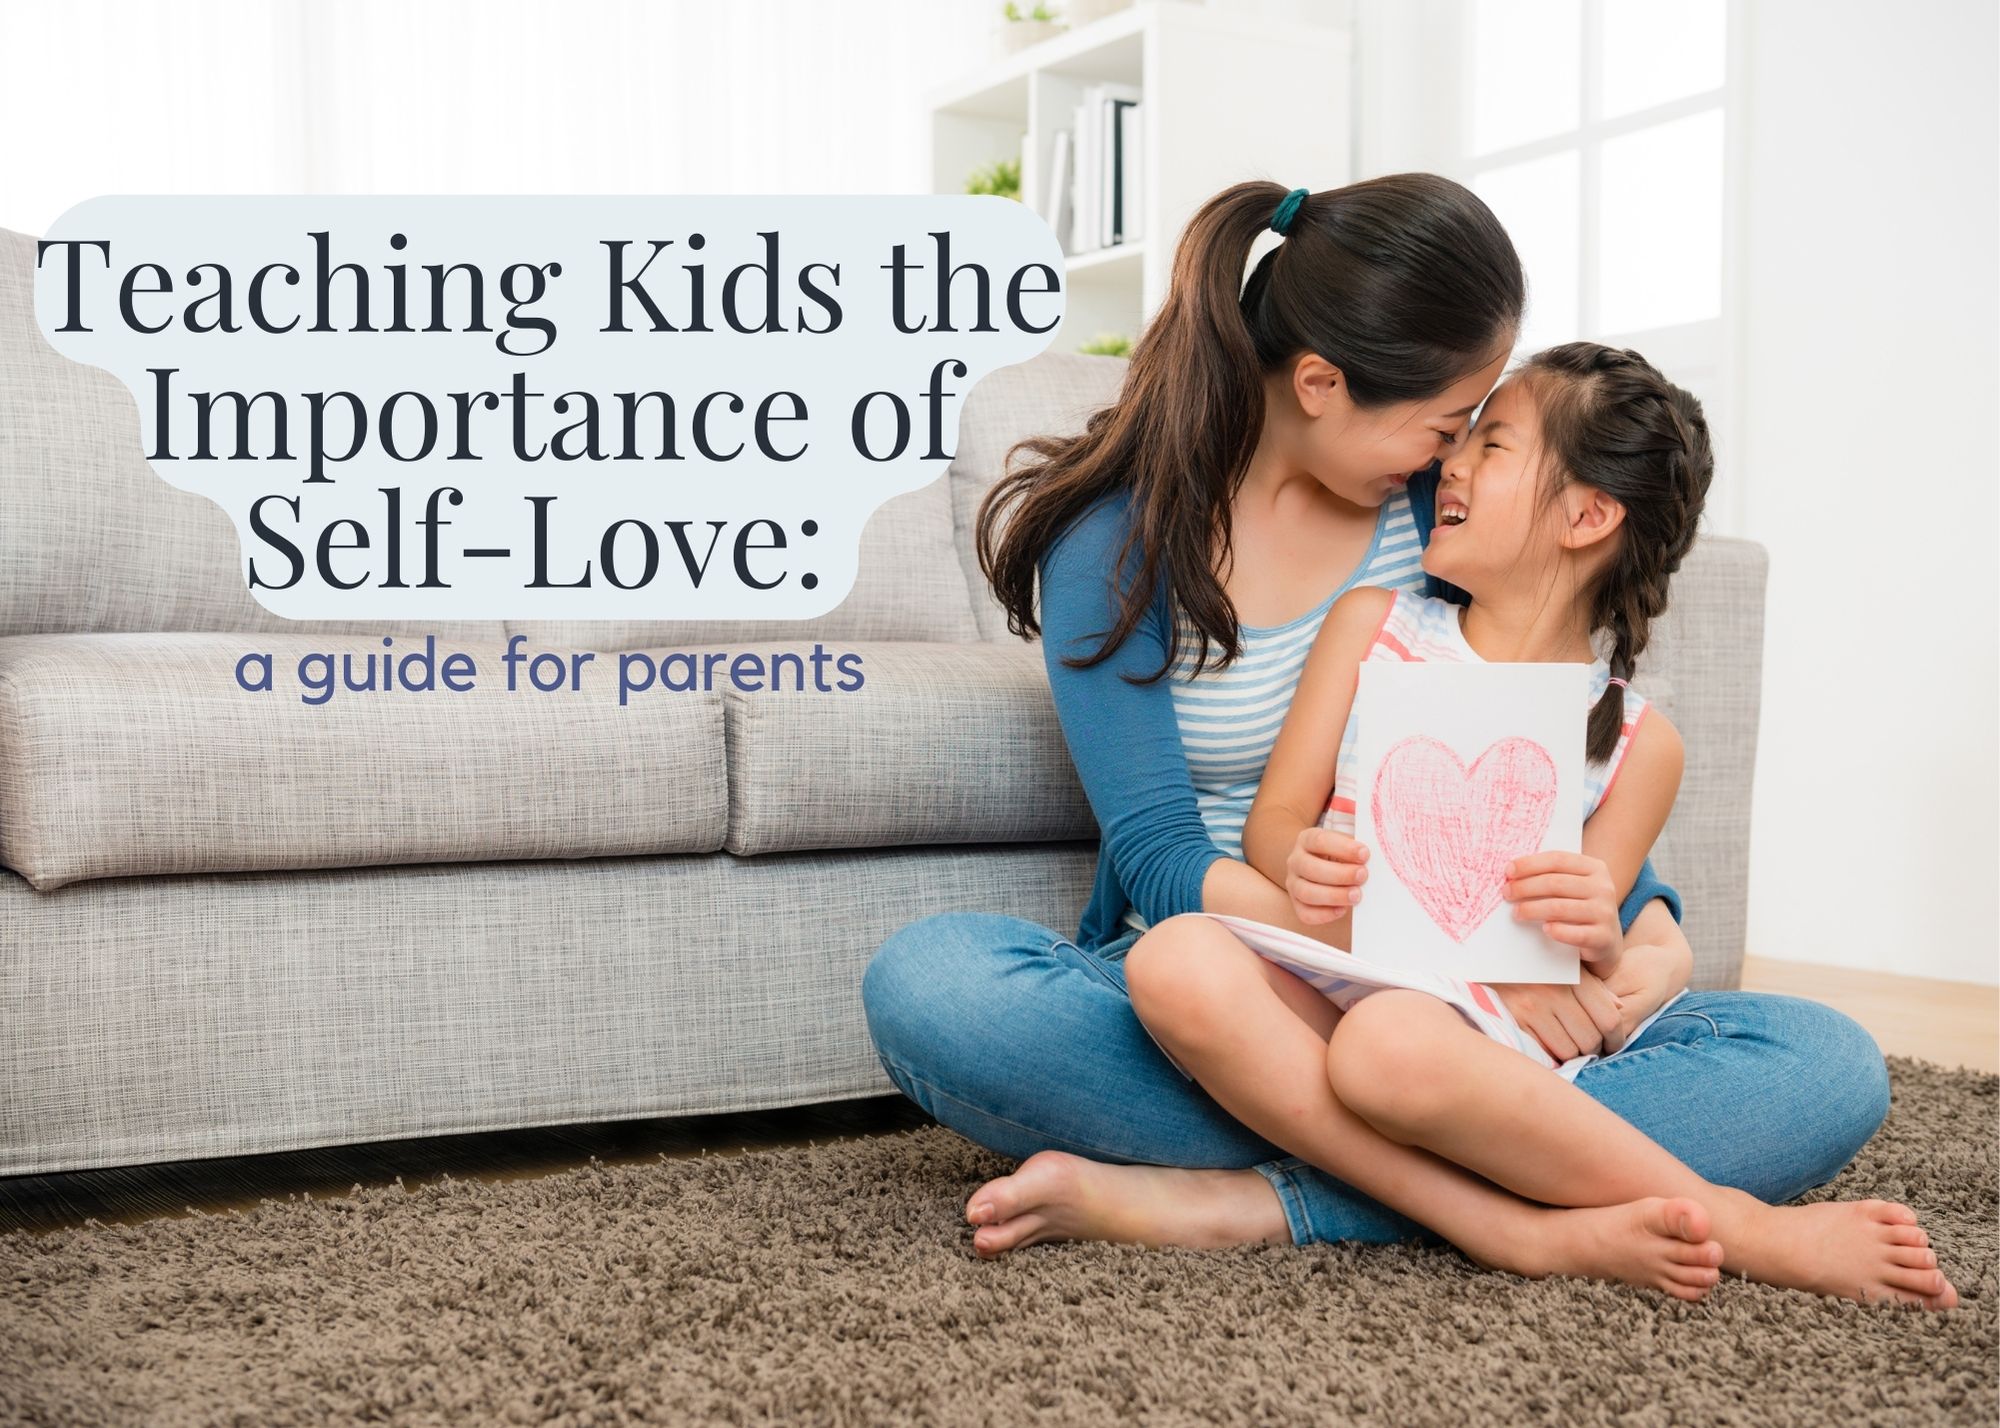 How to Teach Kids the Importance of Self-Love